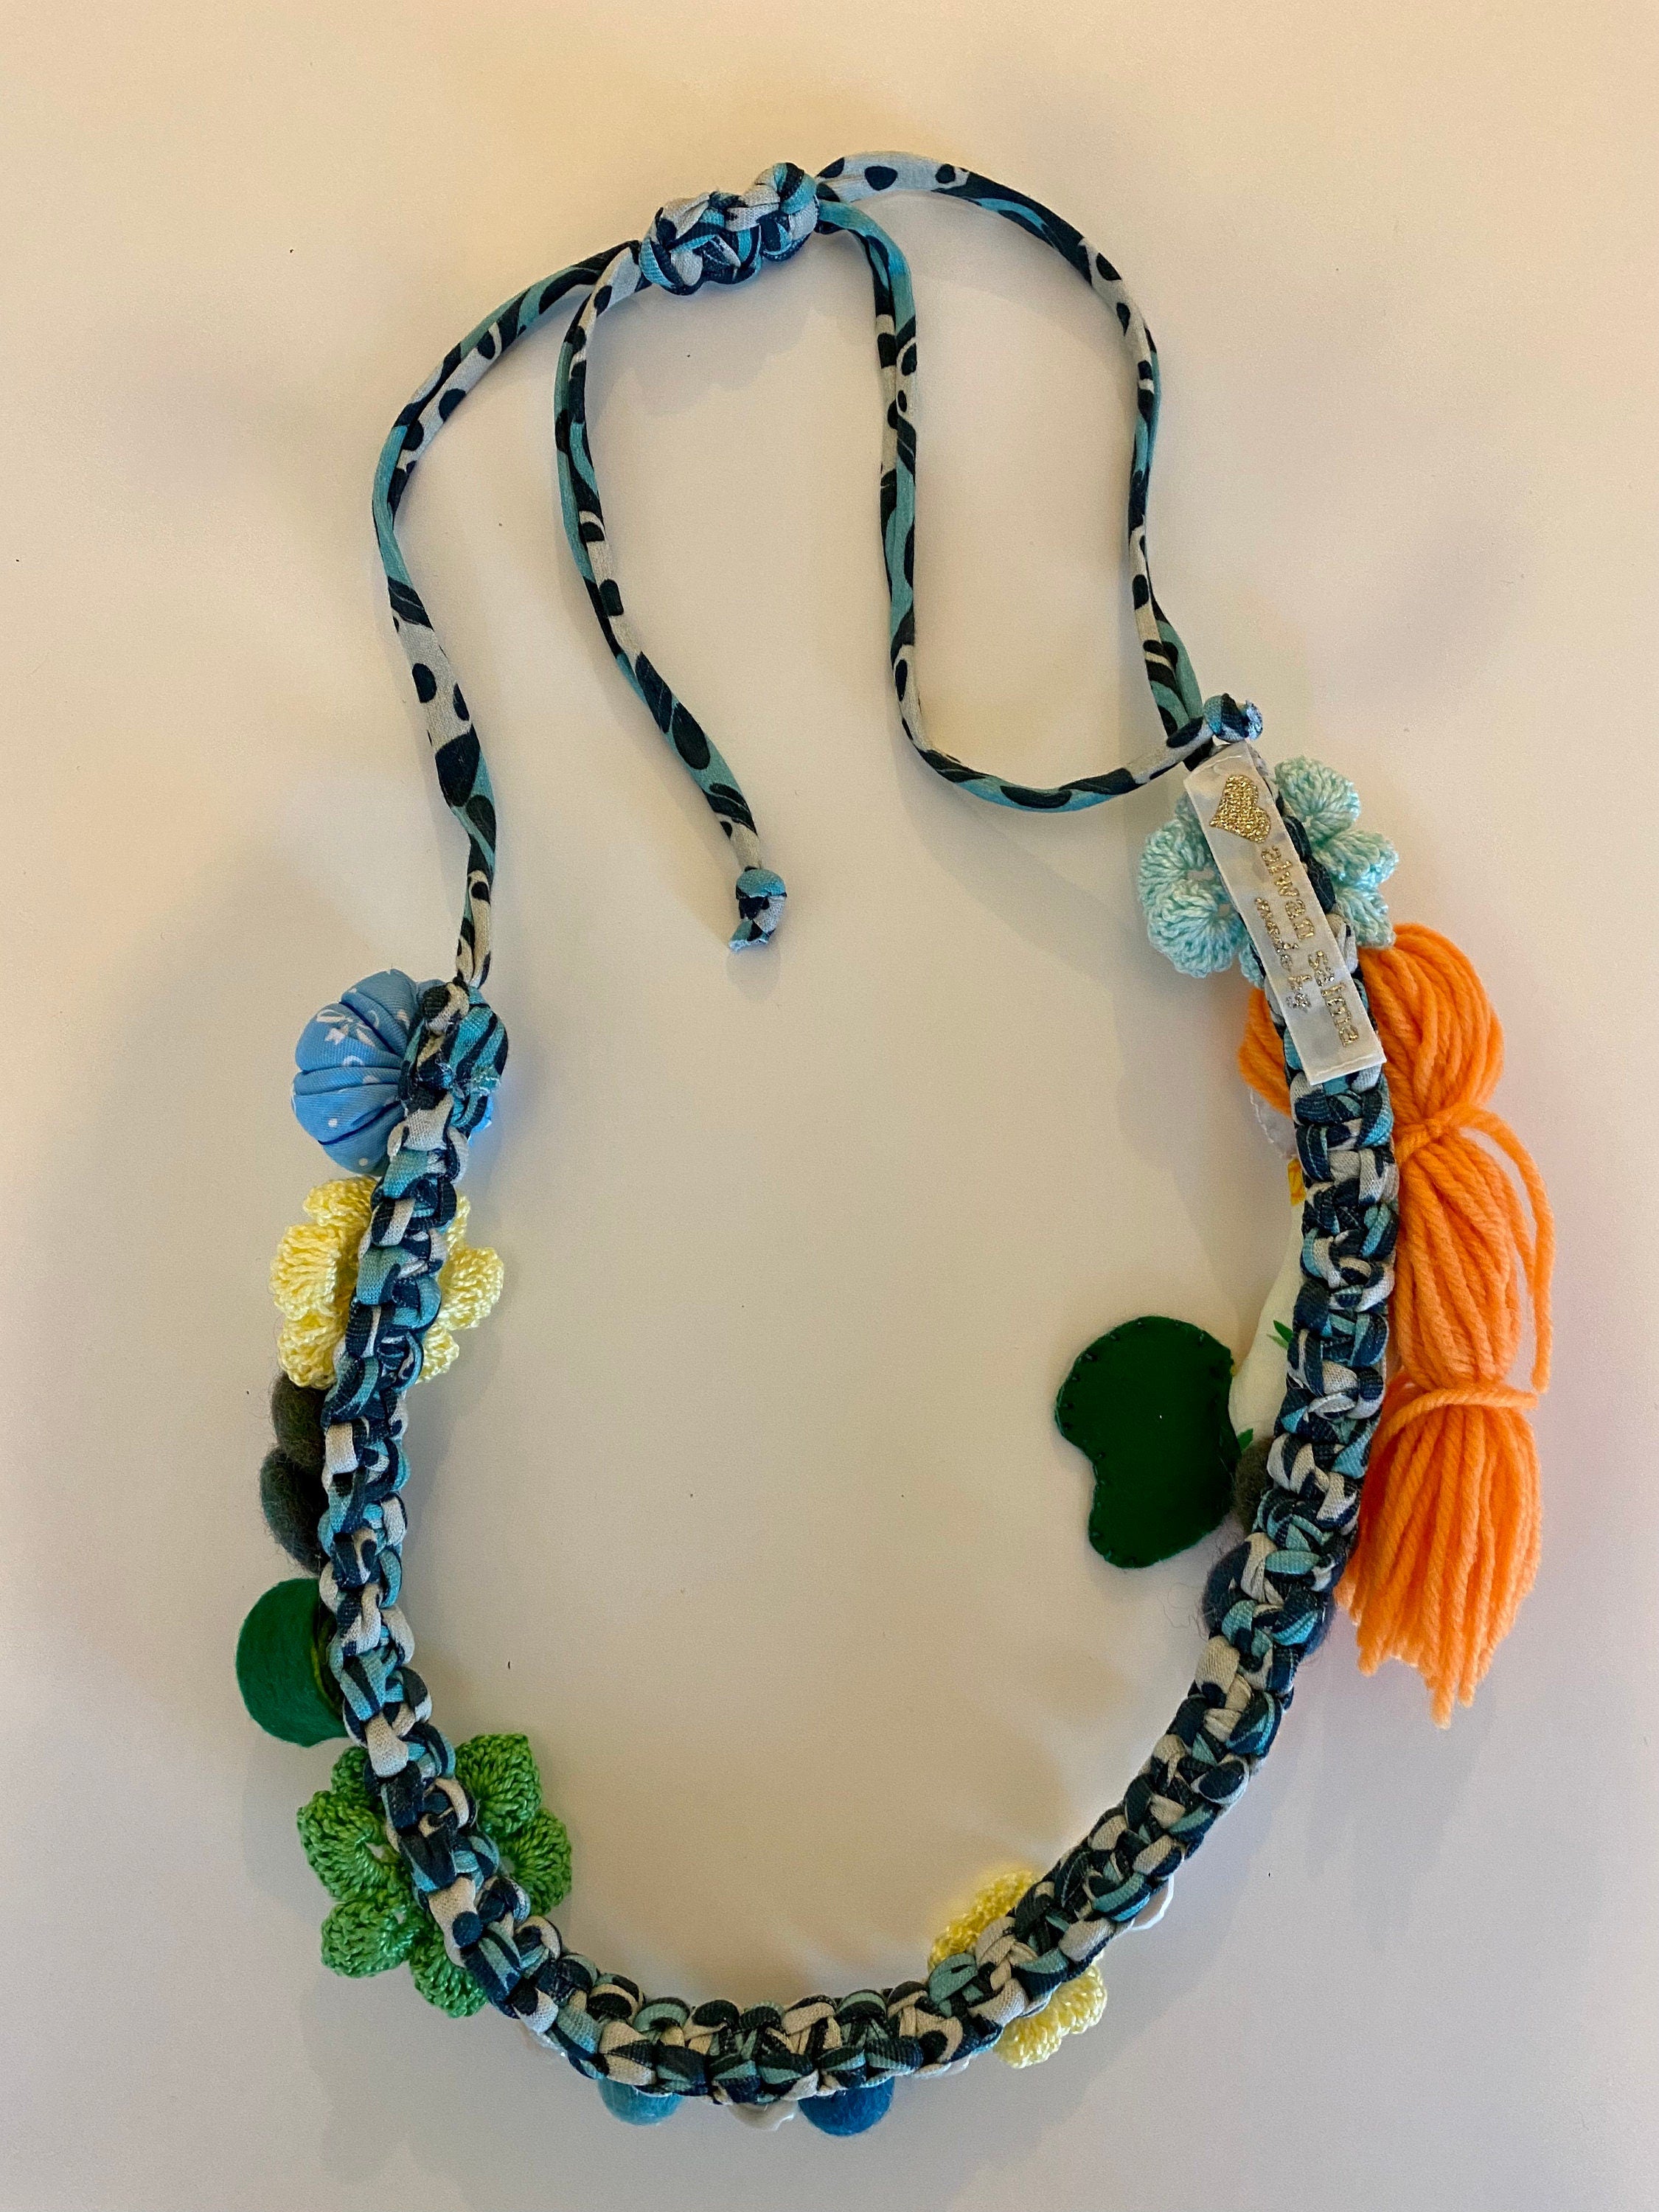 Fabric covered bead necklace tutorial - The Crafty Quilter